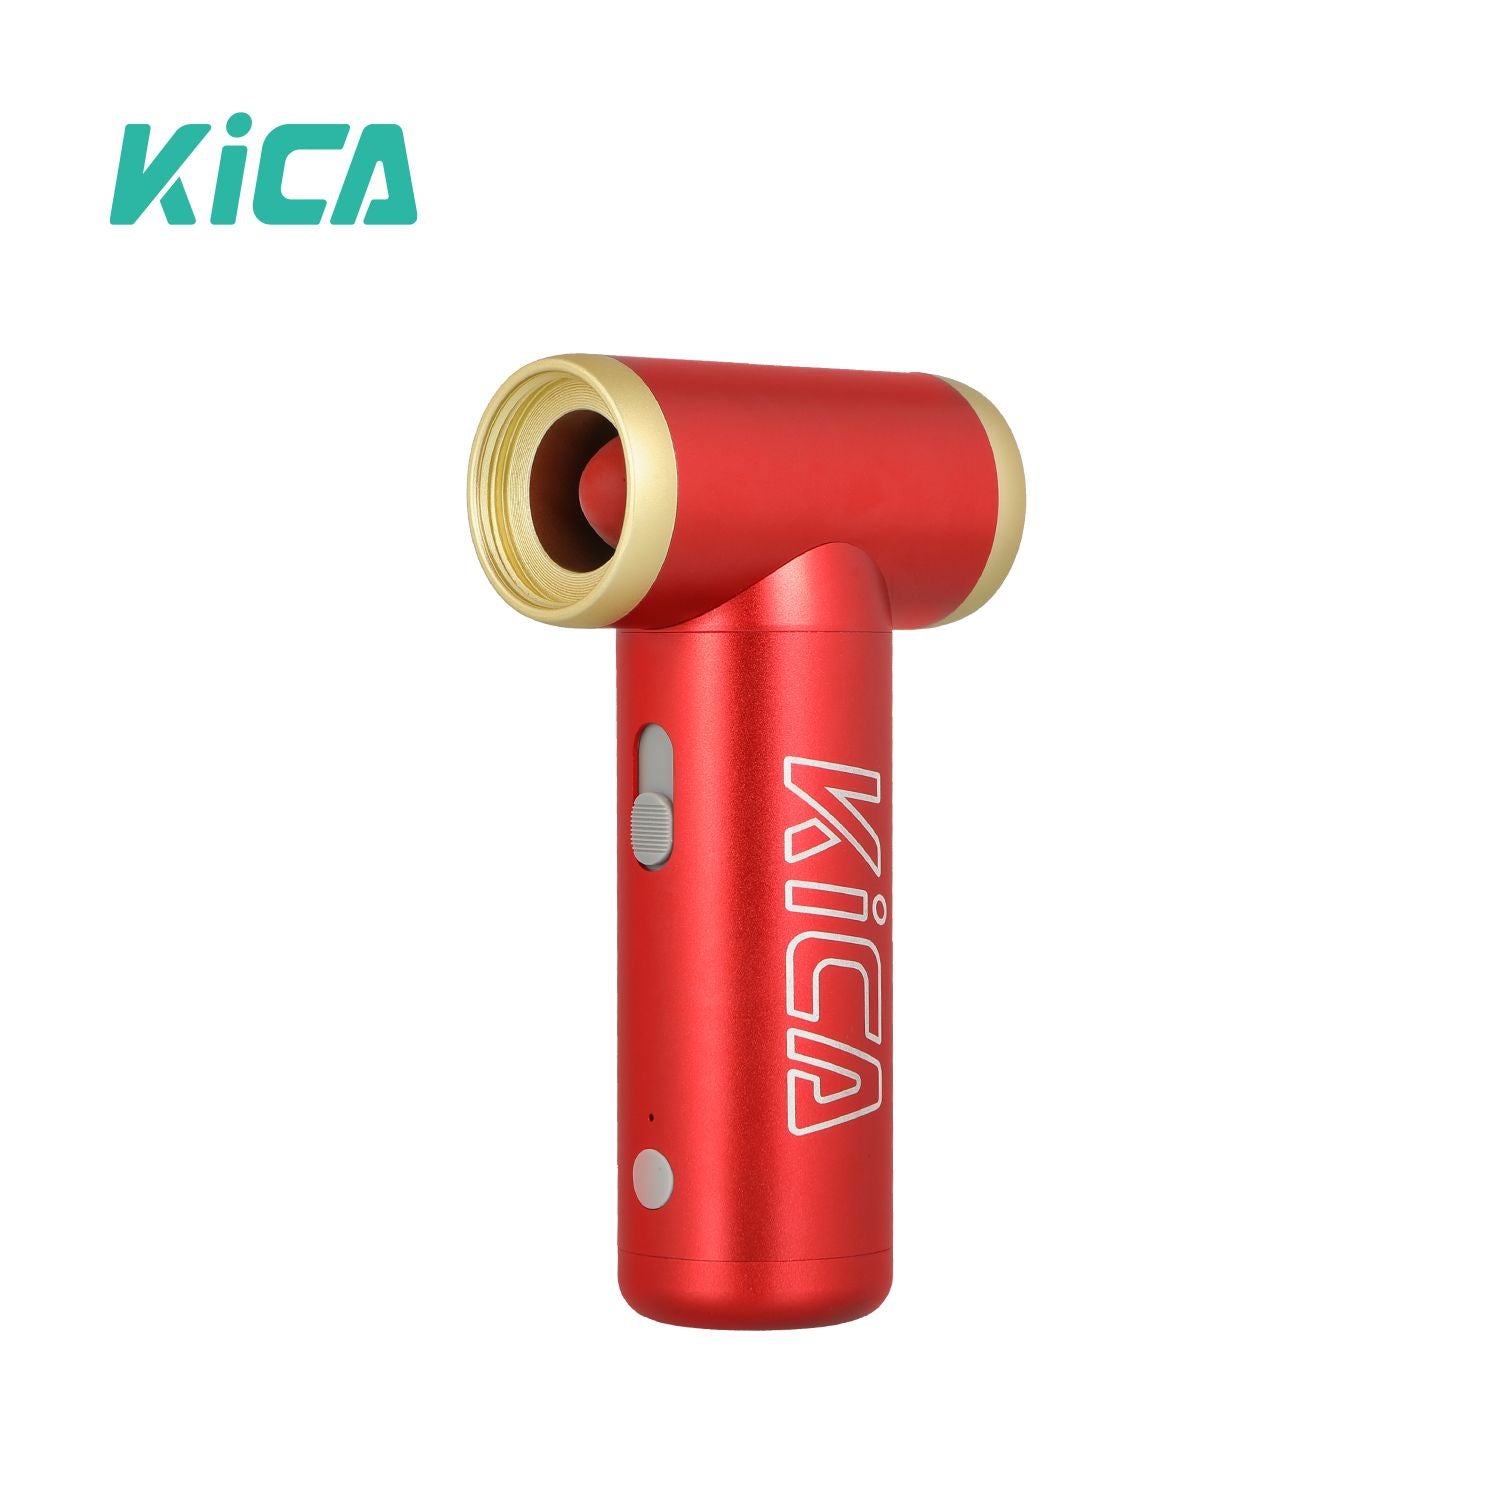 KiCA Jet Fan 2 | Compact But Powerful Air Duster – KICA